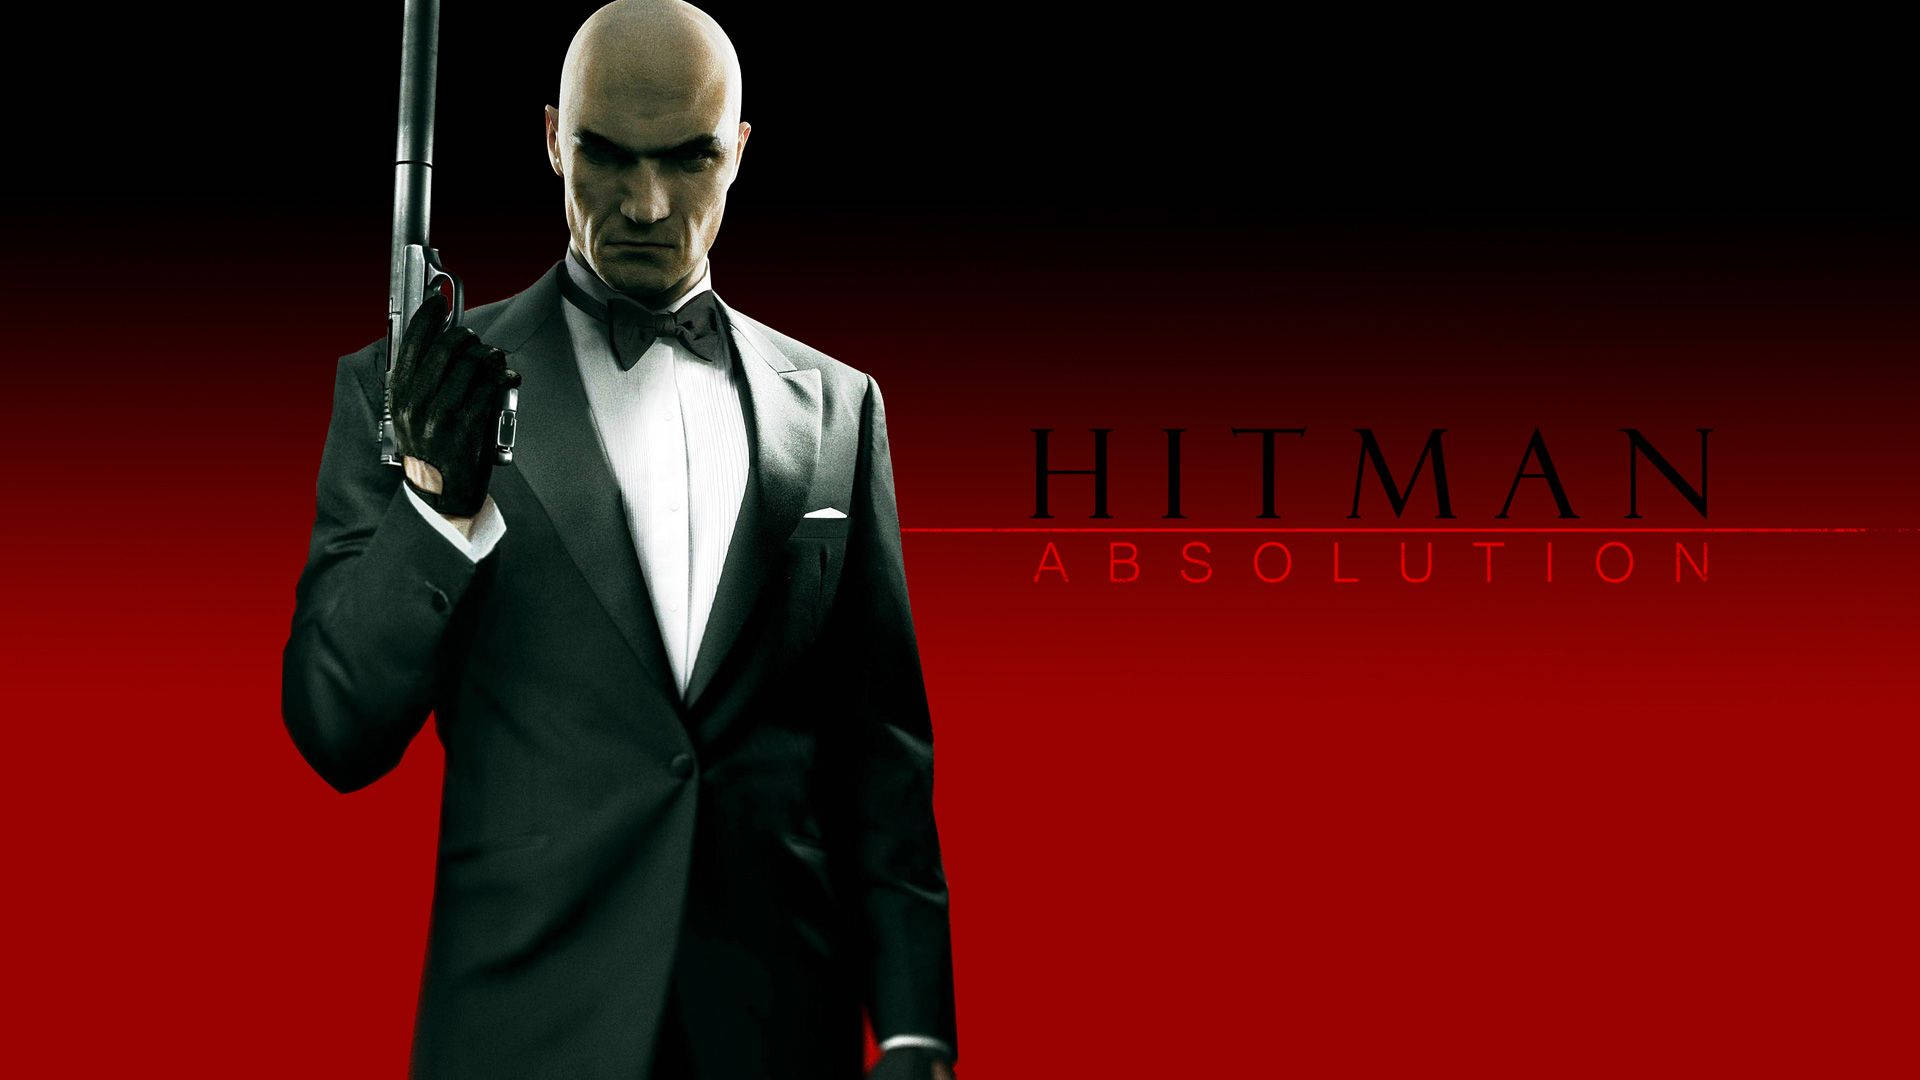 Hitman Absolution Classic Poster Background